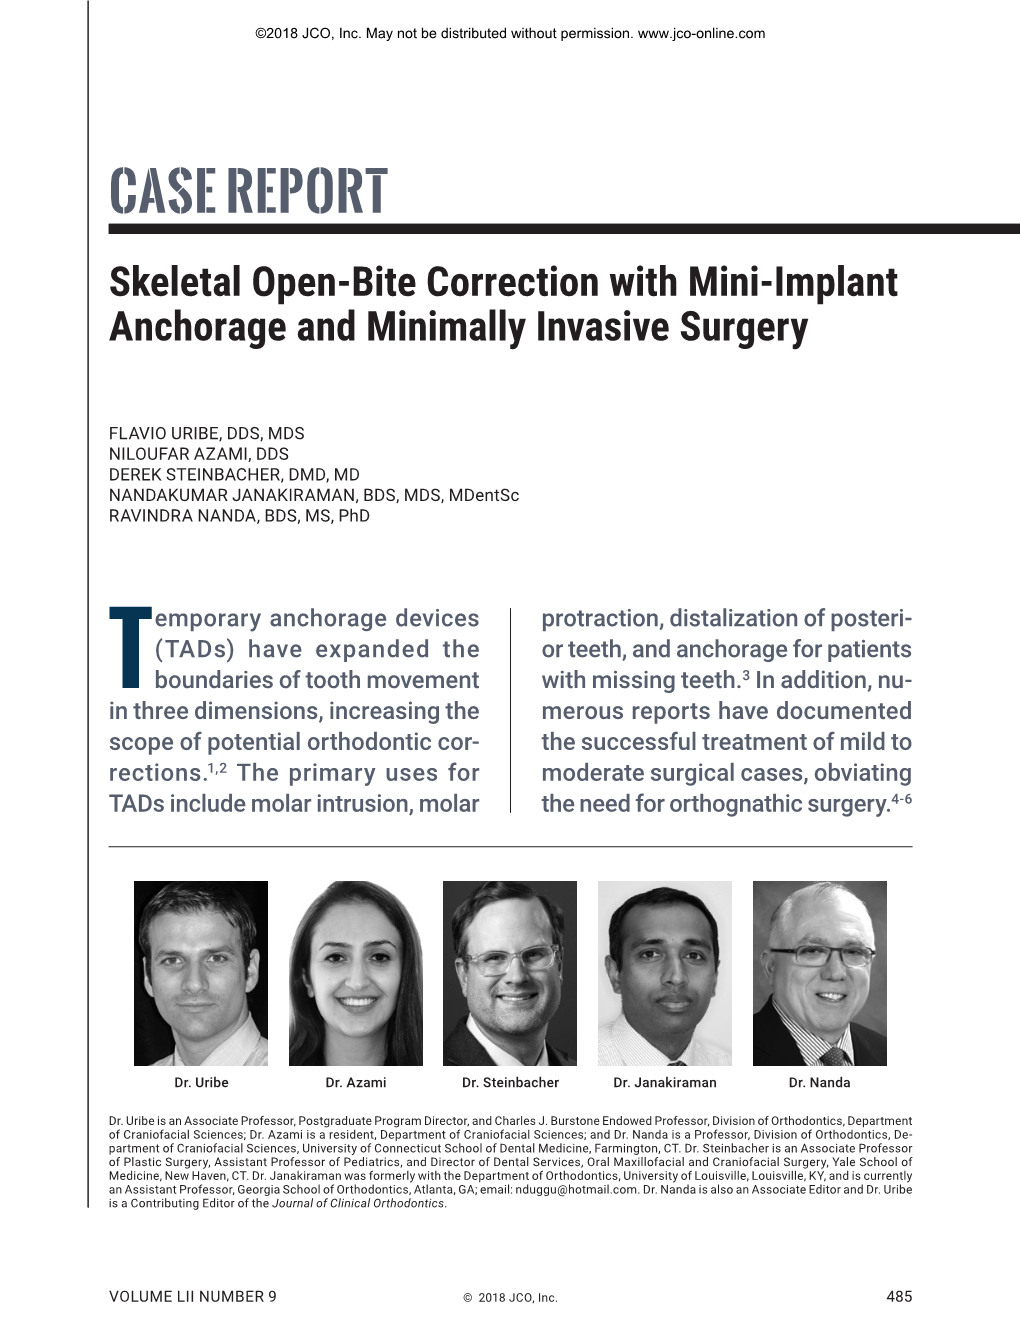 CASE REPORT Skeletal Open-Bite Correction with Mini-Implant Anchorage and Minimally Invasive Surgery